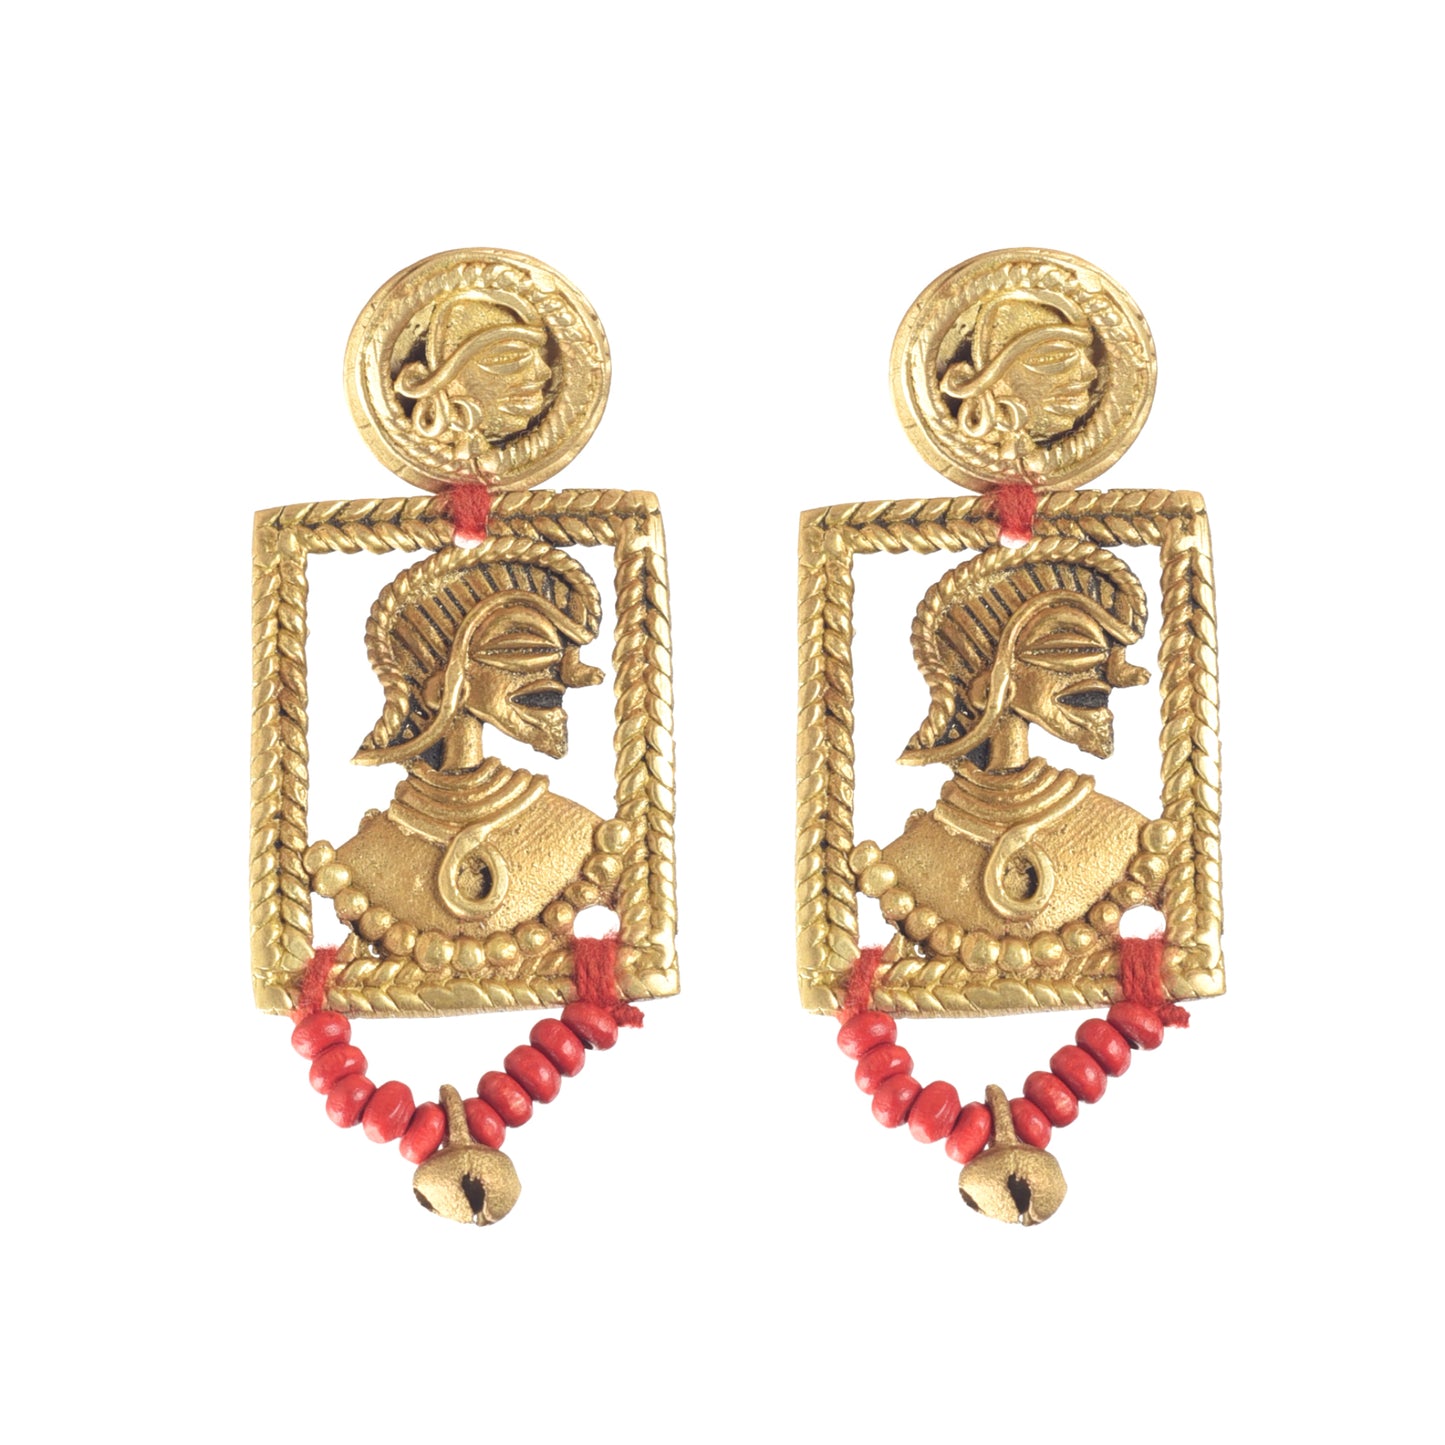 The Royal Handcrafted Earrings